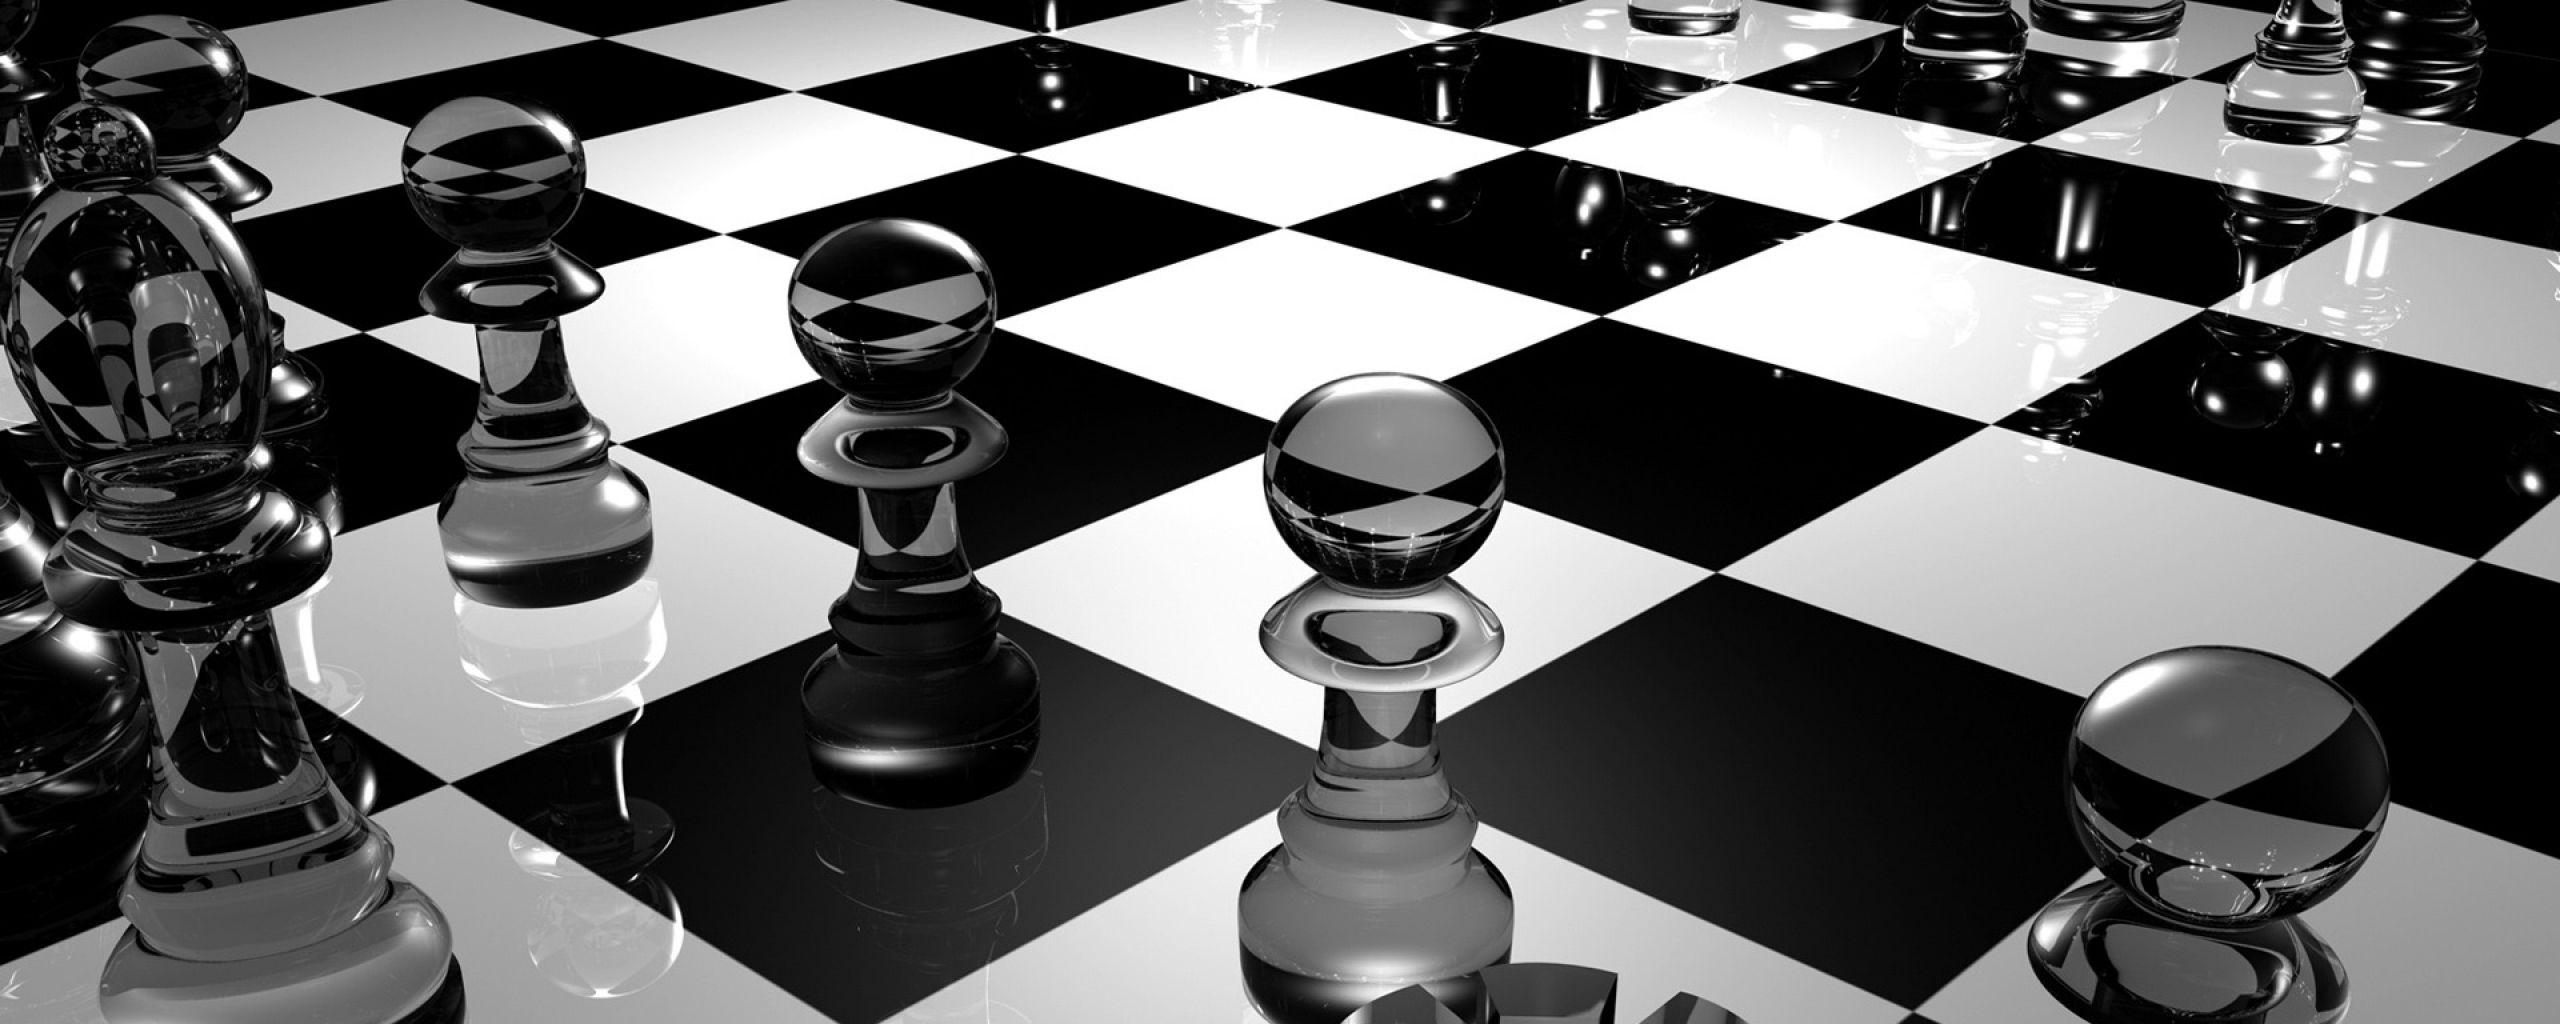 100+] Black And White Chess Wallpapers